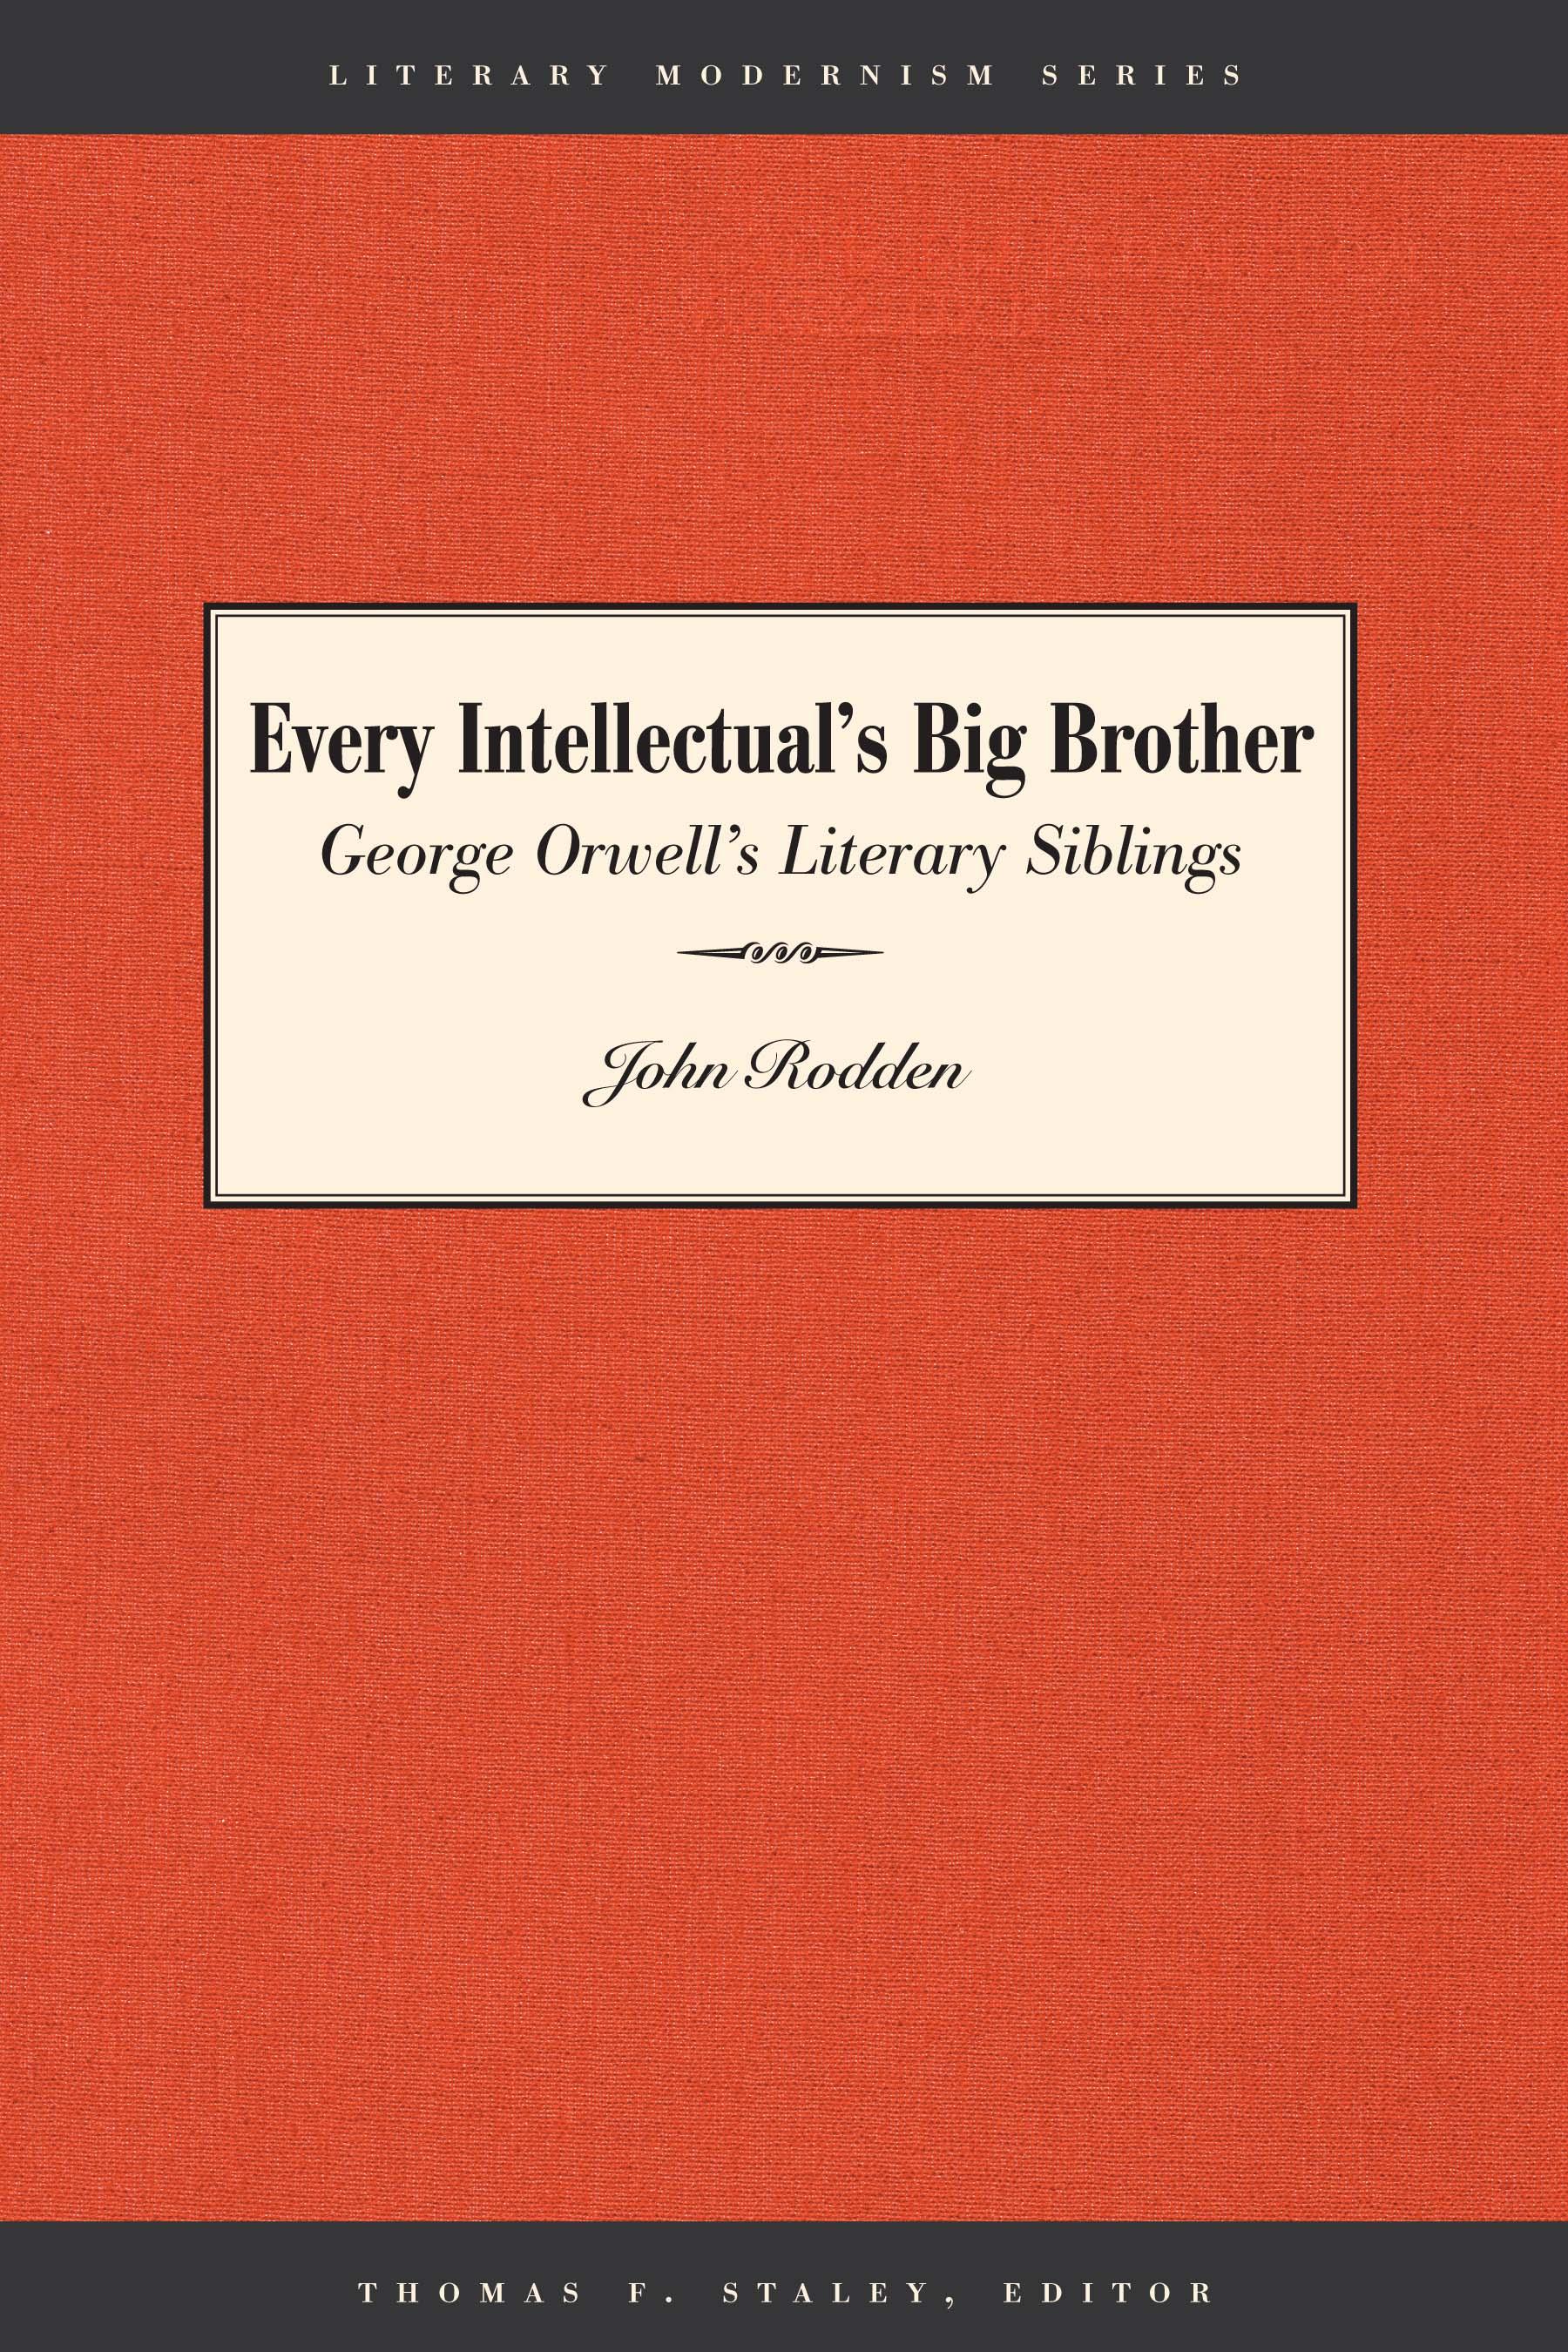 Every Intellectual's Big Brother